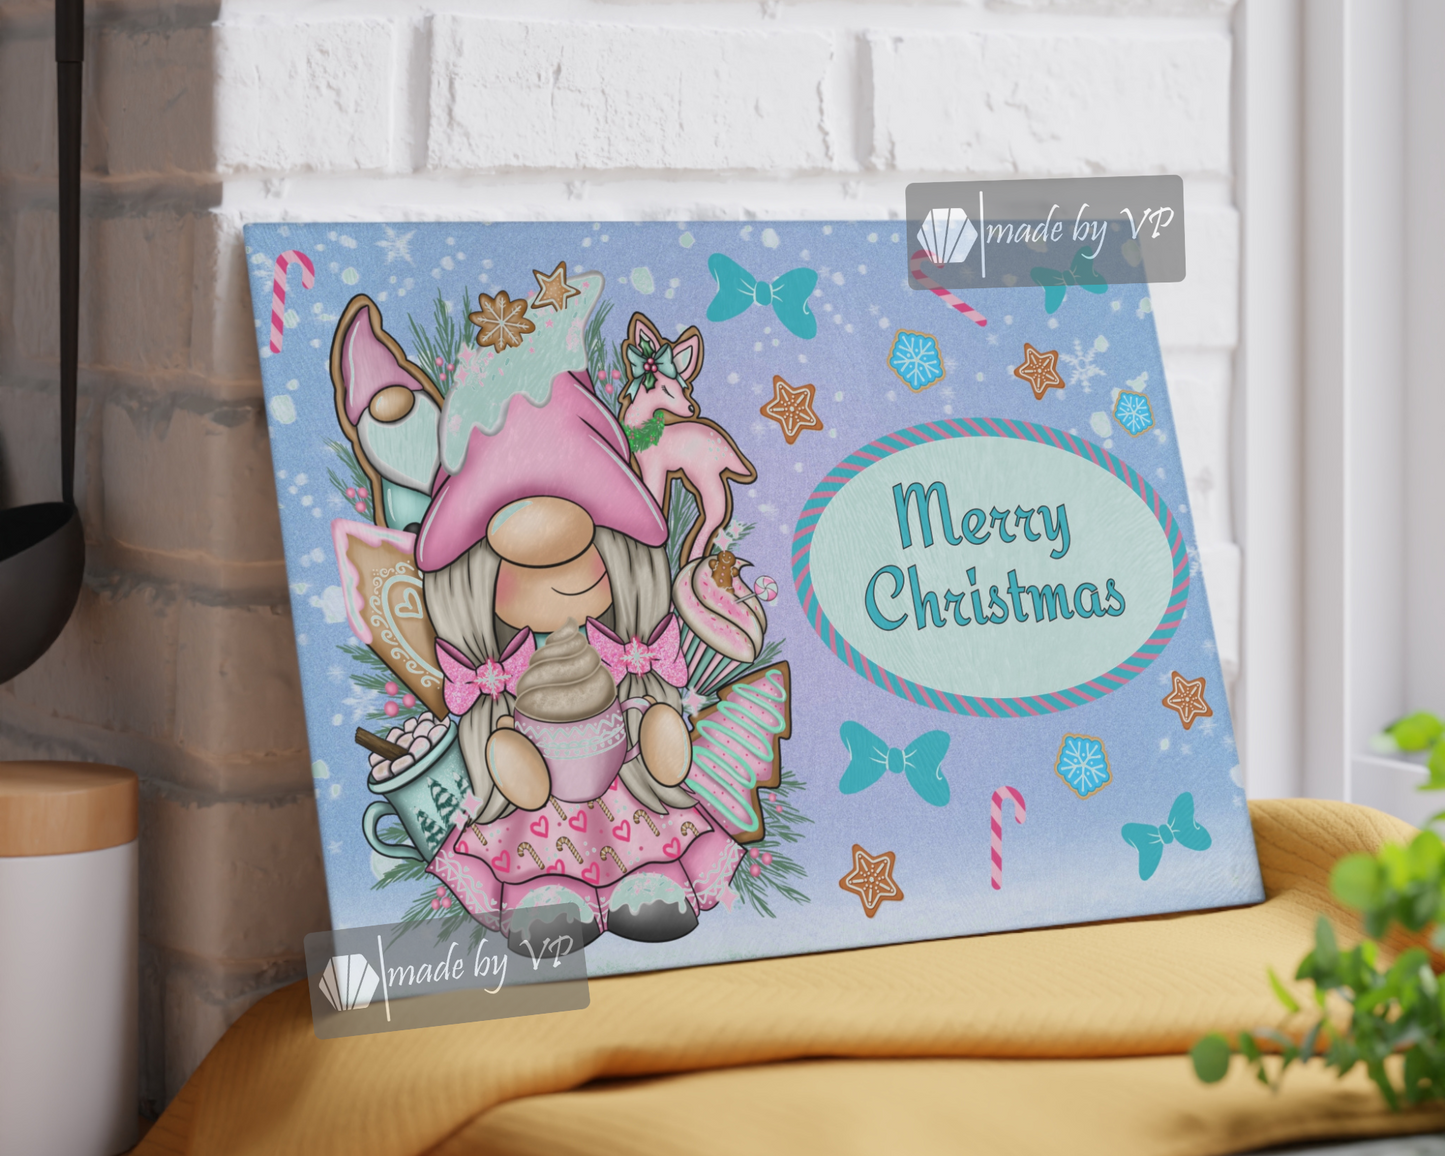 Personalised Christmas Cutting Board, Gnomes